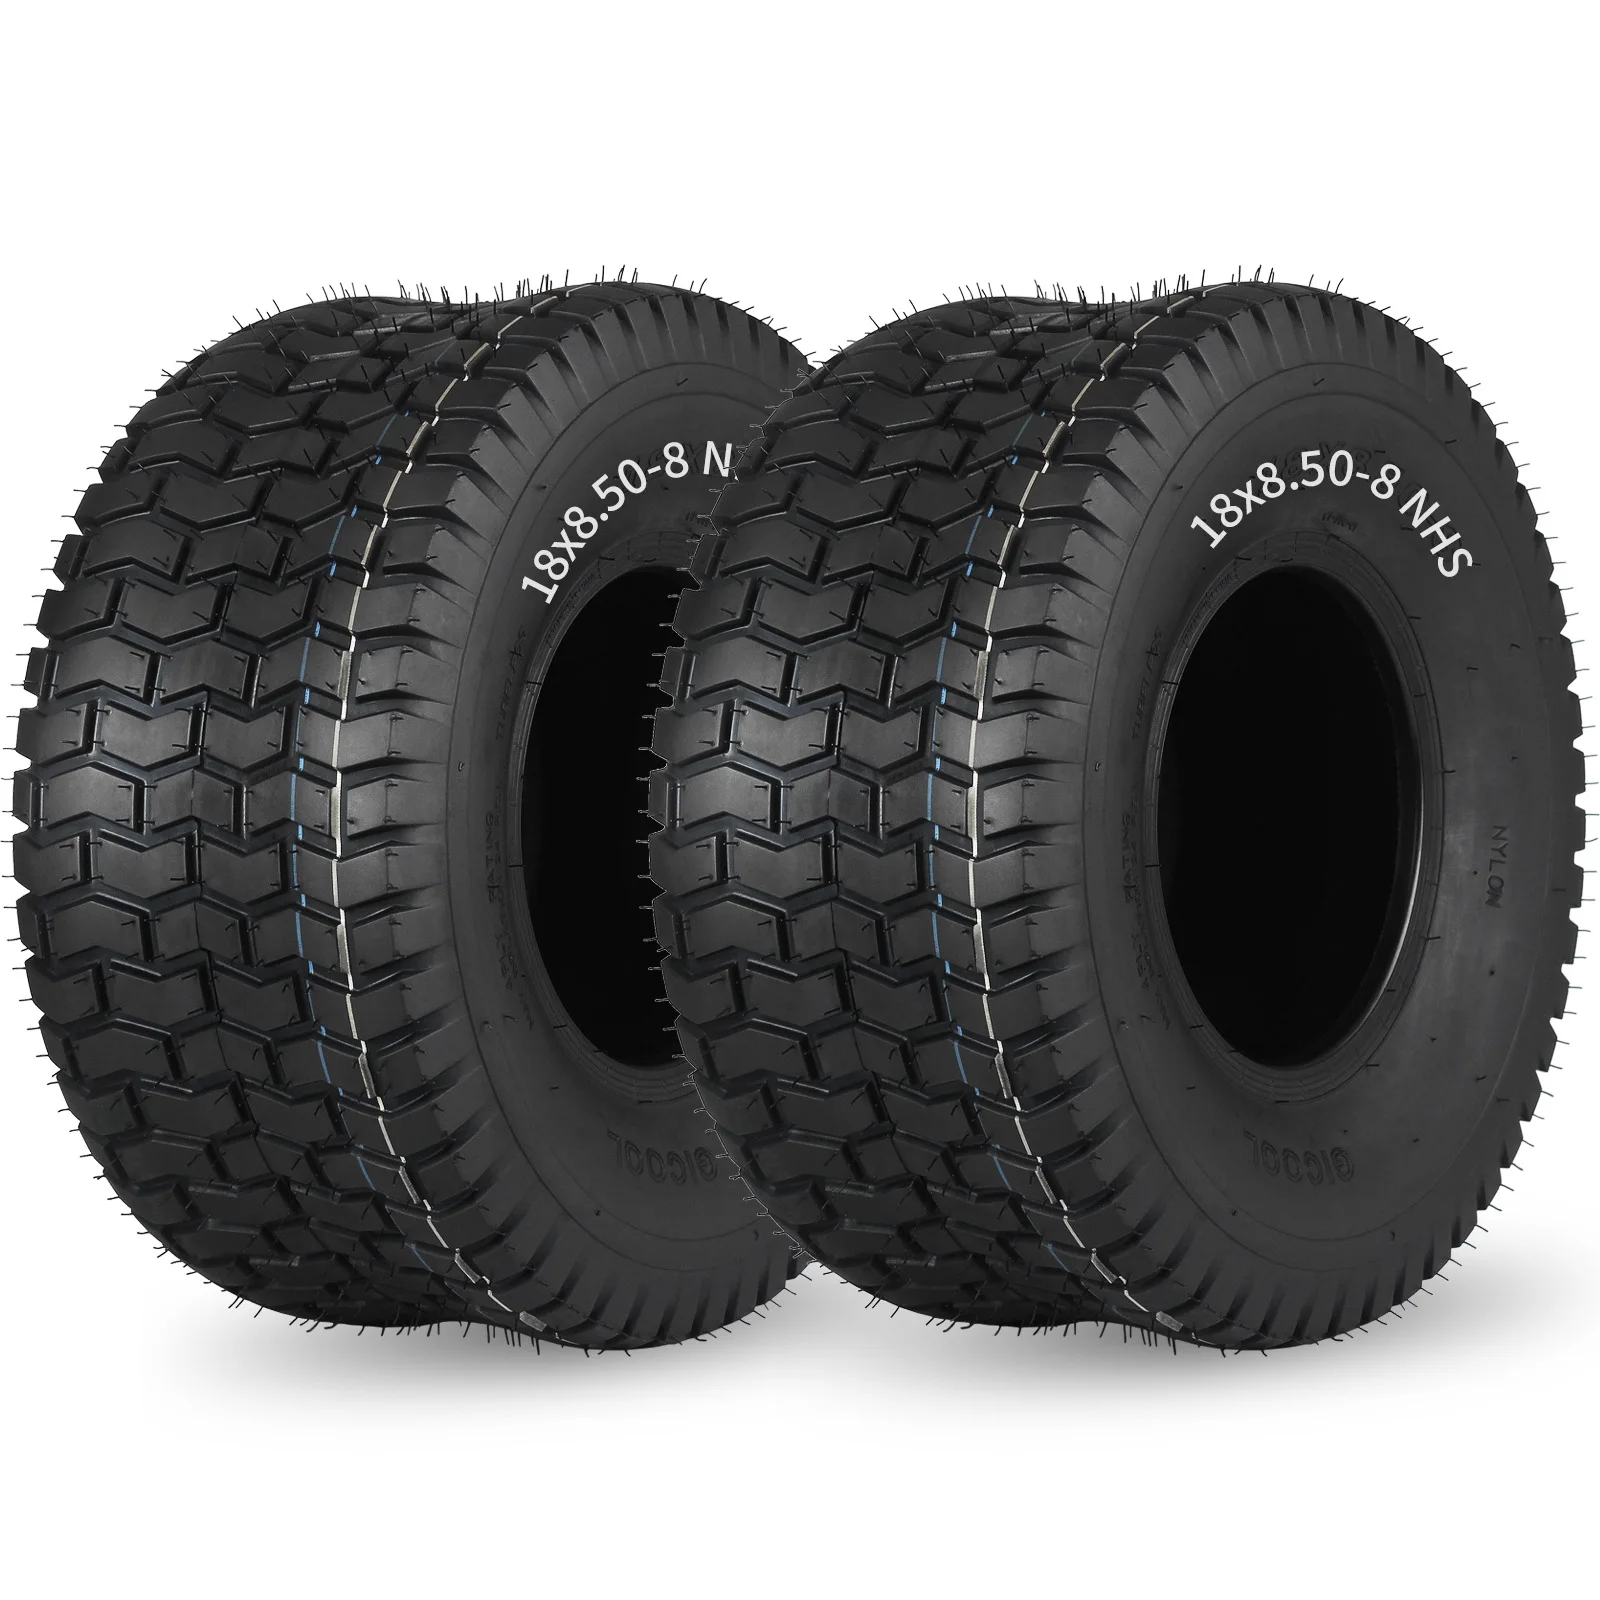 18 x 8.50-8 Turf-V Pattern Lawn Mower Tubeless Tire, 18x8.5-8 for Tractor Riding Lawnmowers